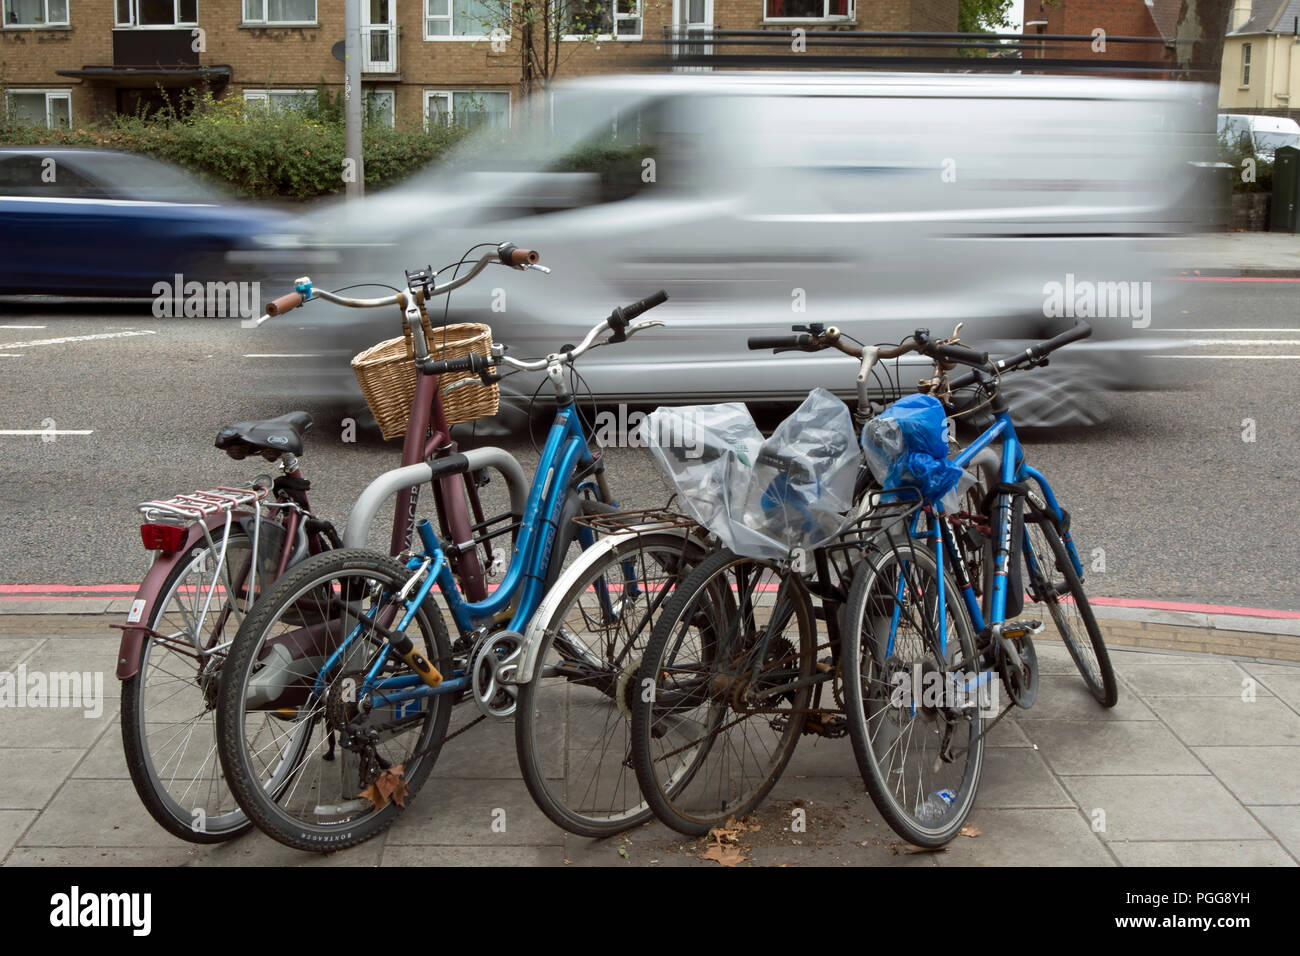 white van seen in blurred motion passes a rack of parked bicycles, in east sheen, london, england Stock Photo